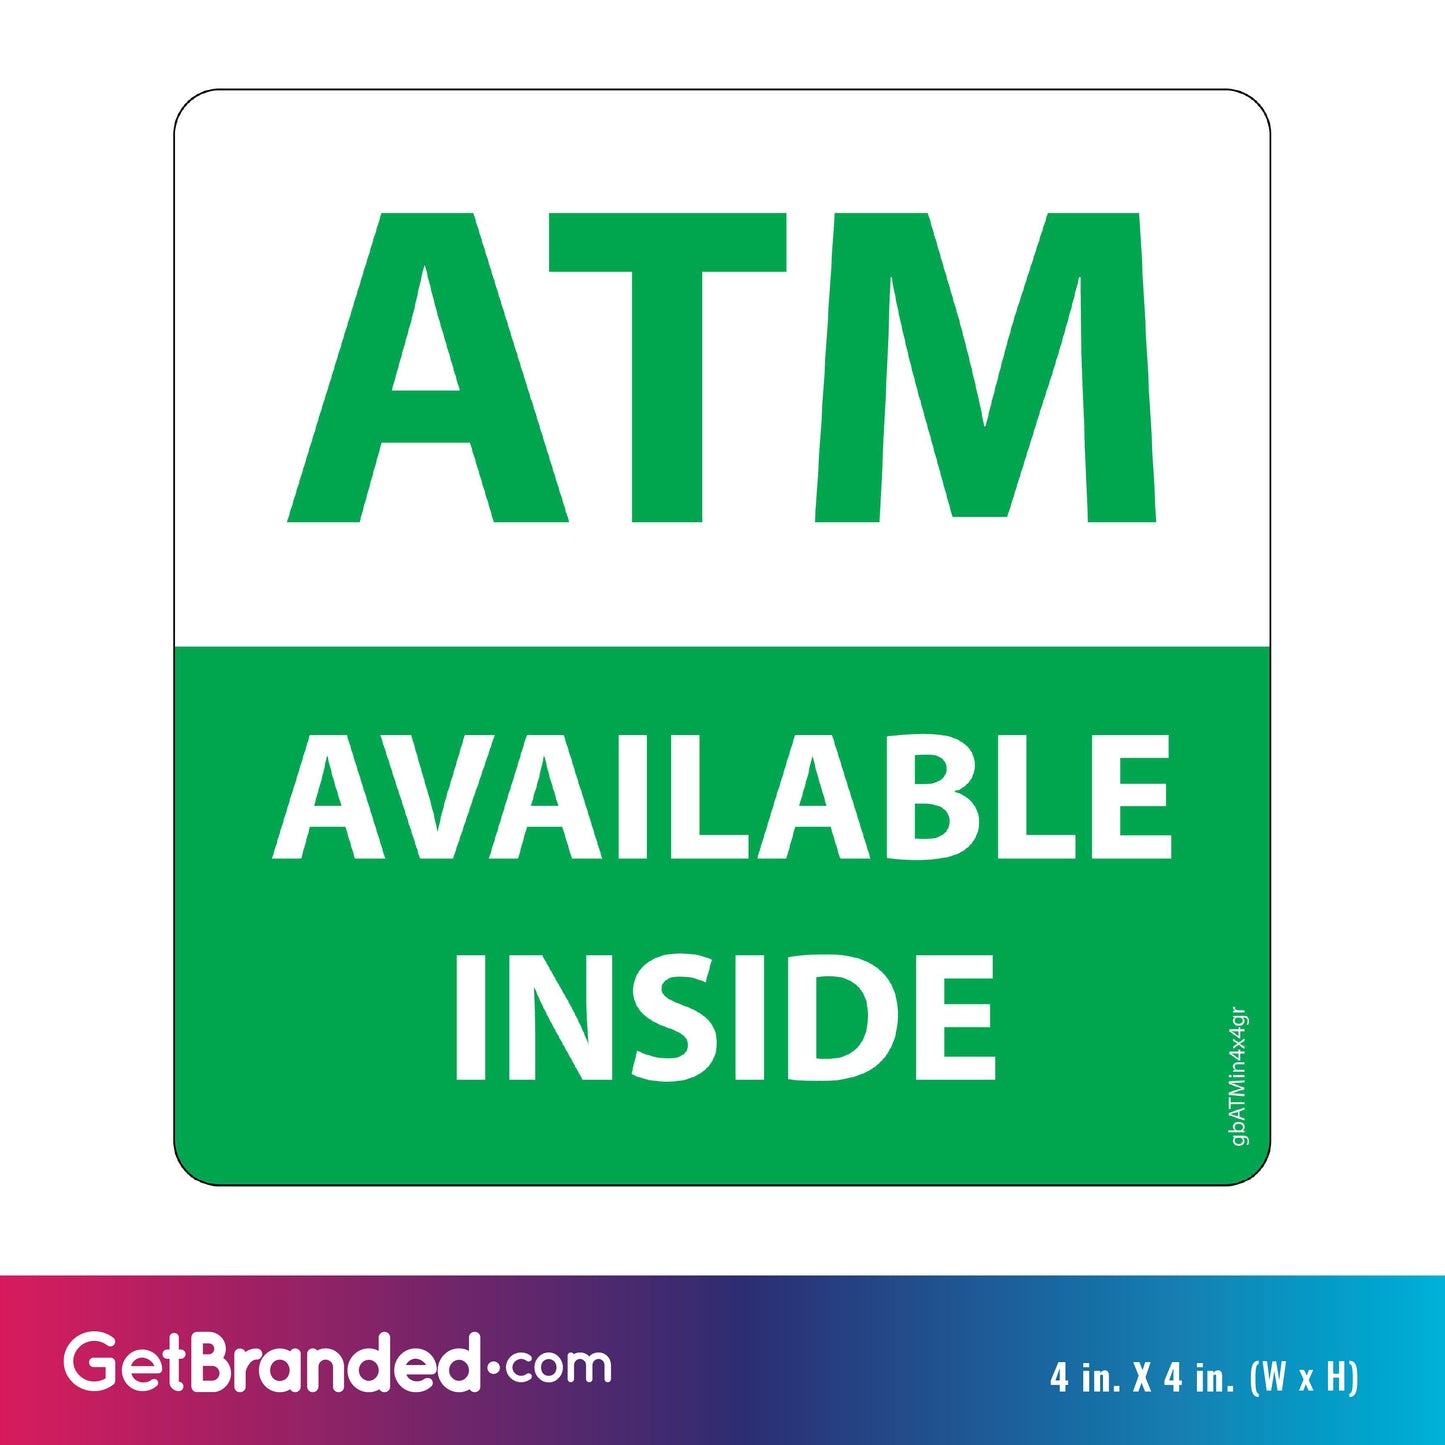 ATM Available Inside, Green and White Decal size guide. 4 inches by 4 inches in size.